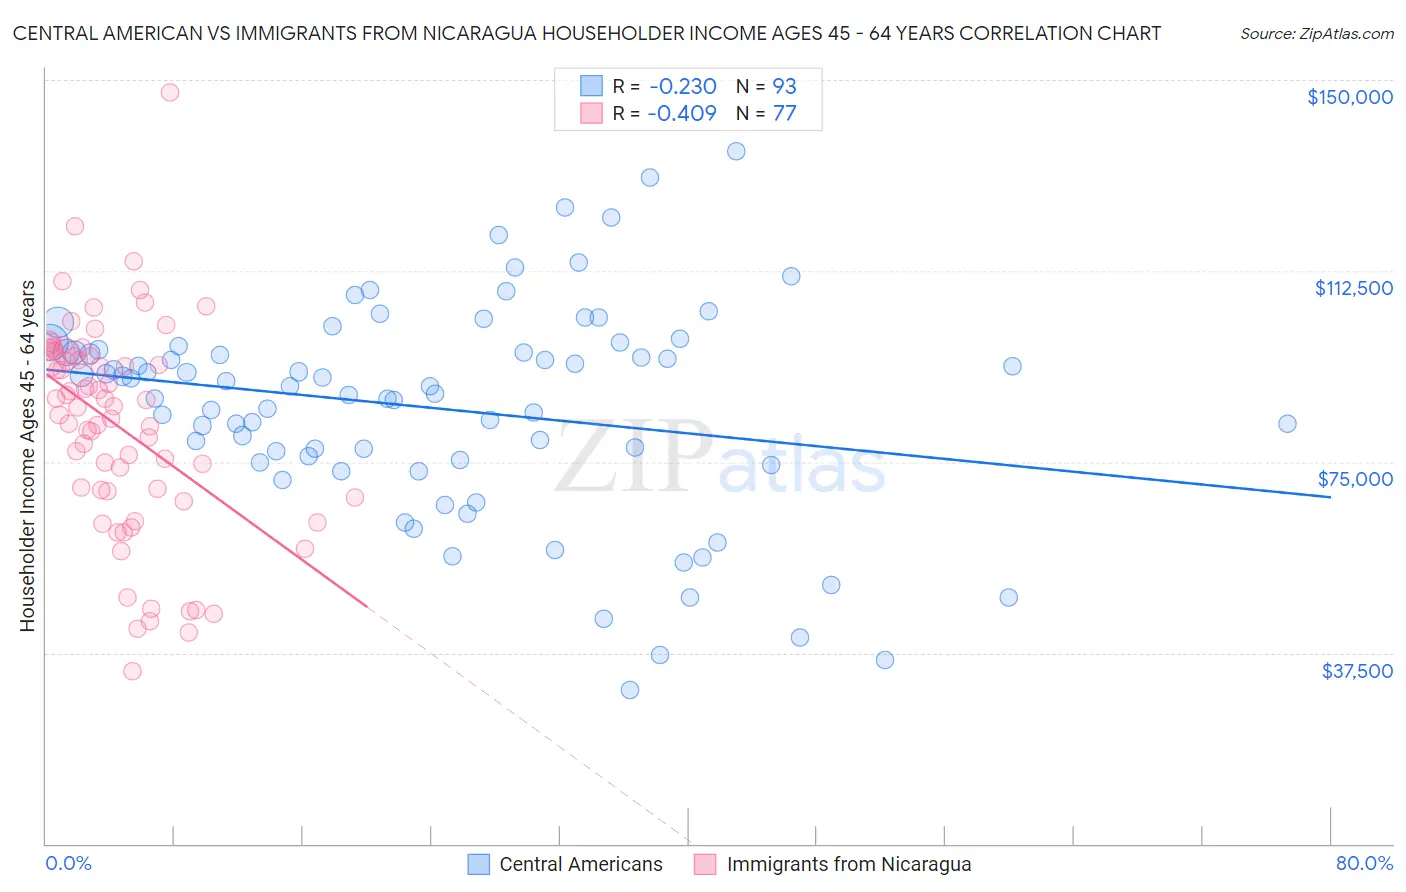 Central American vs Immigrants from Nicaragua Householder Income Ages 45 - 64 years